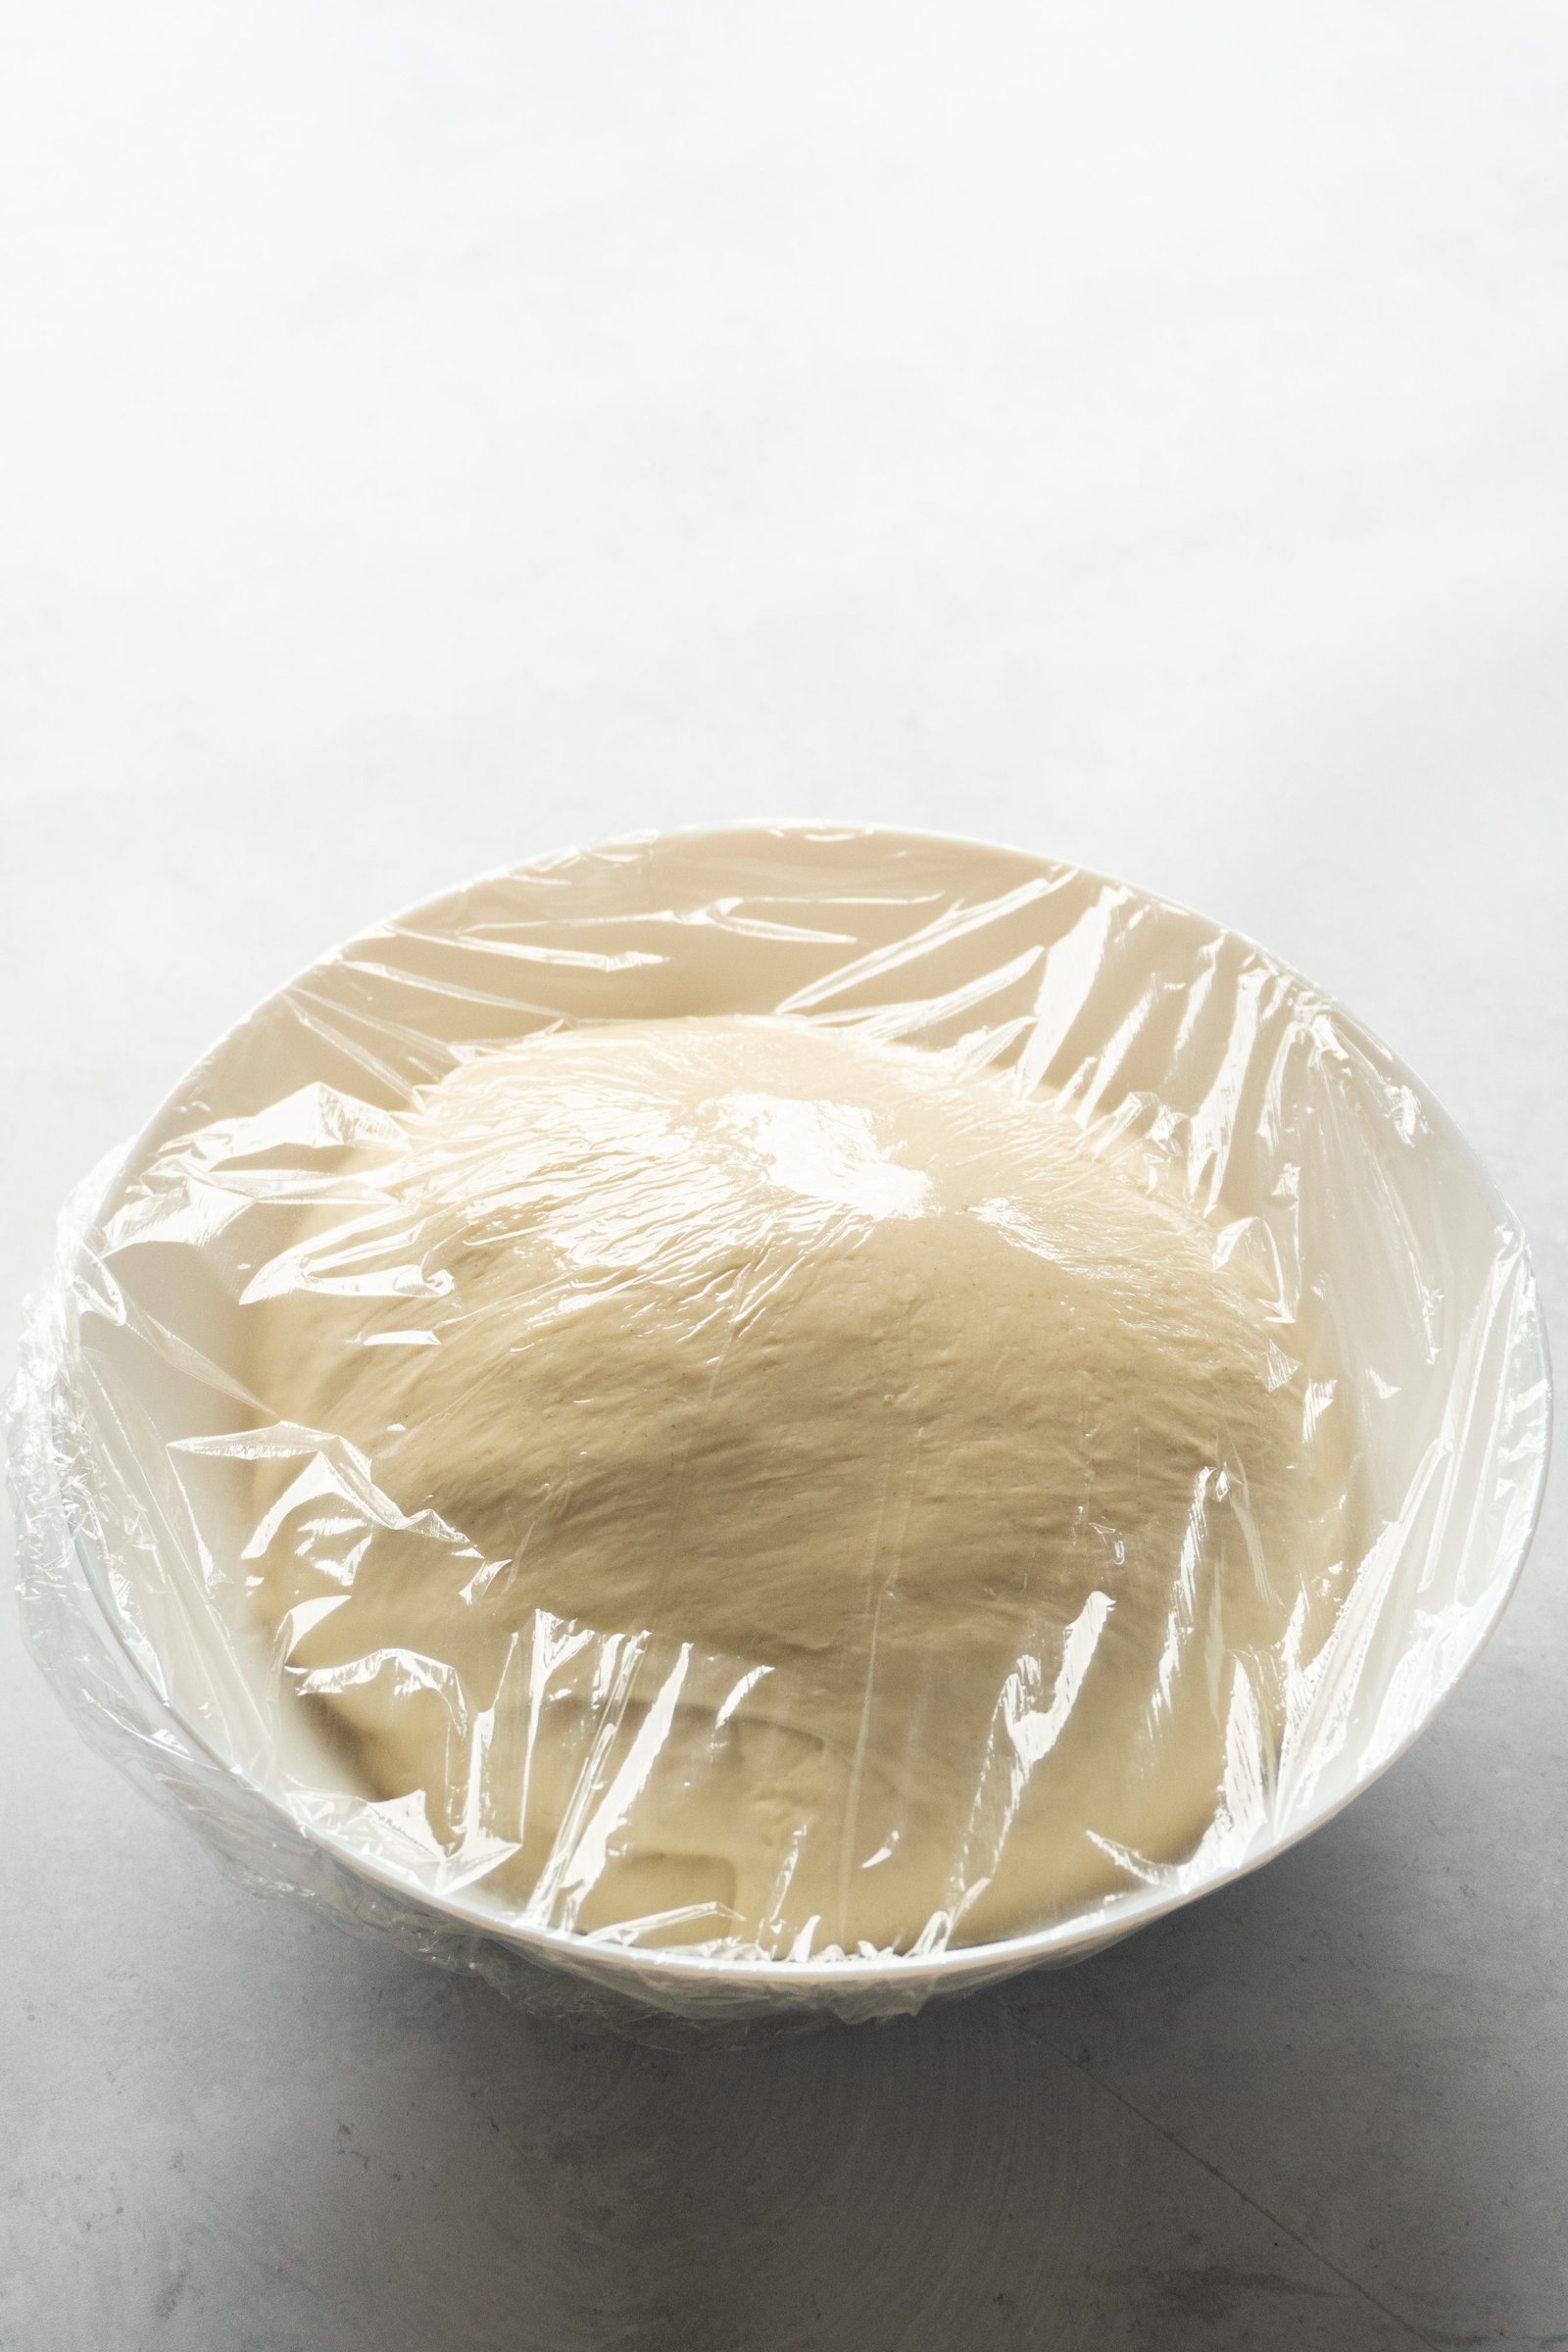 A ball of homemade italian pizza dough resting in a bowl, covered with a cloth, as it rises to its full potential.
